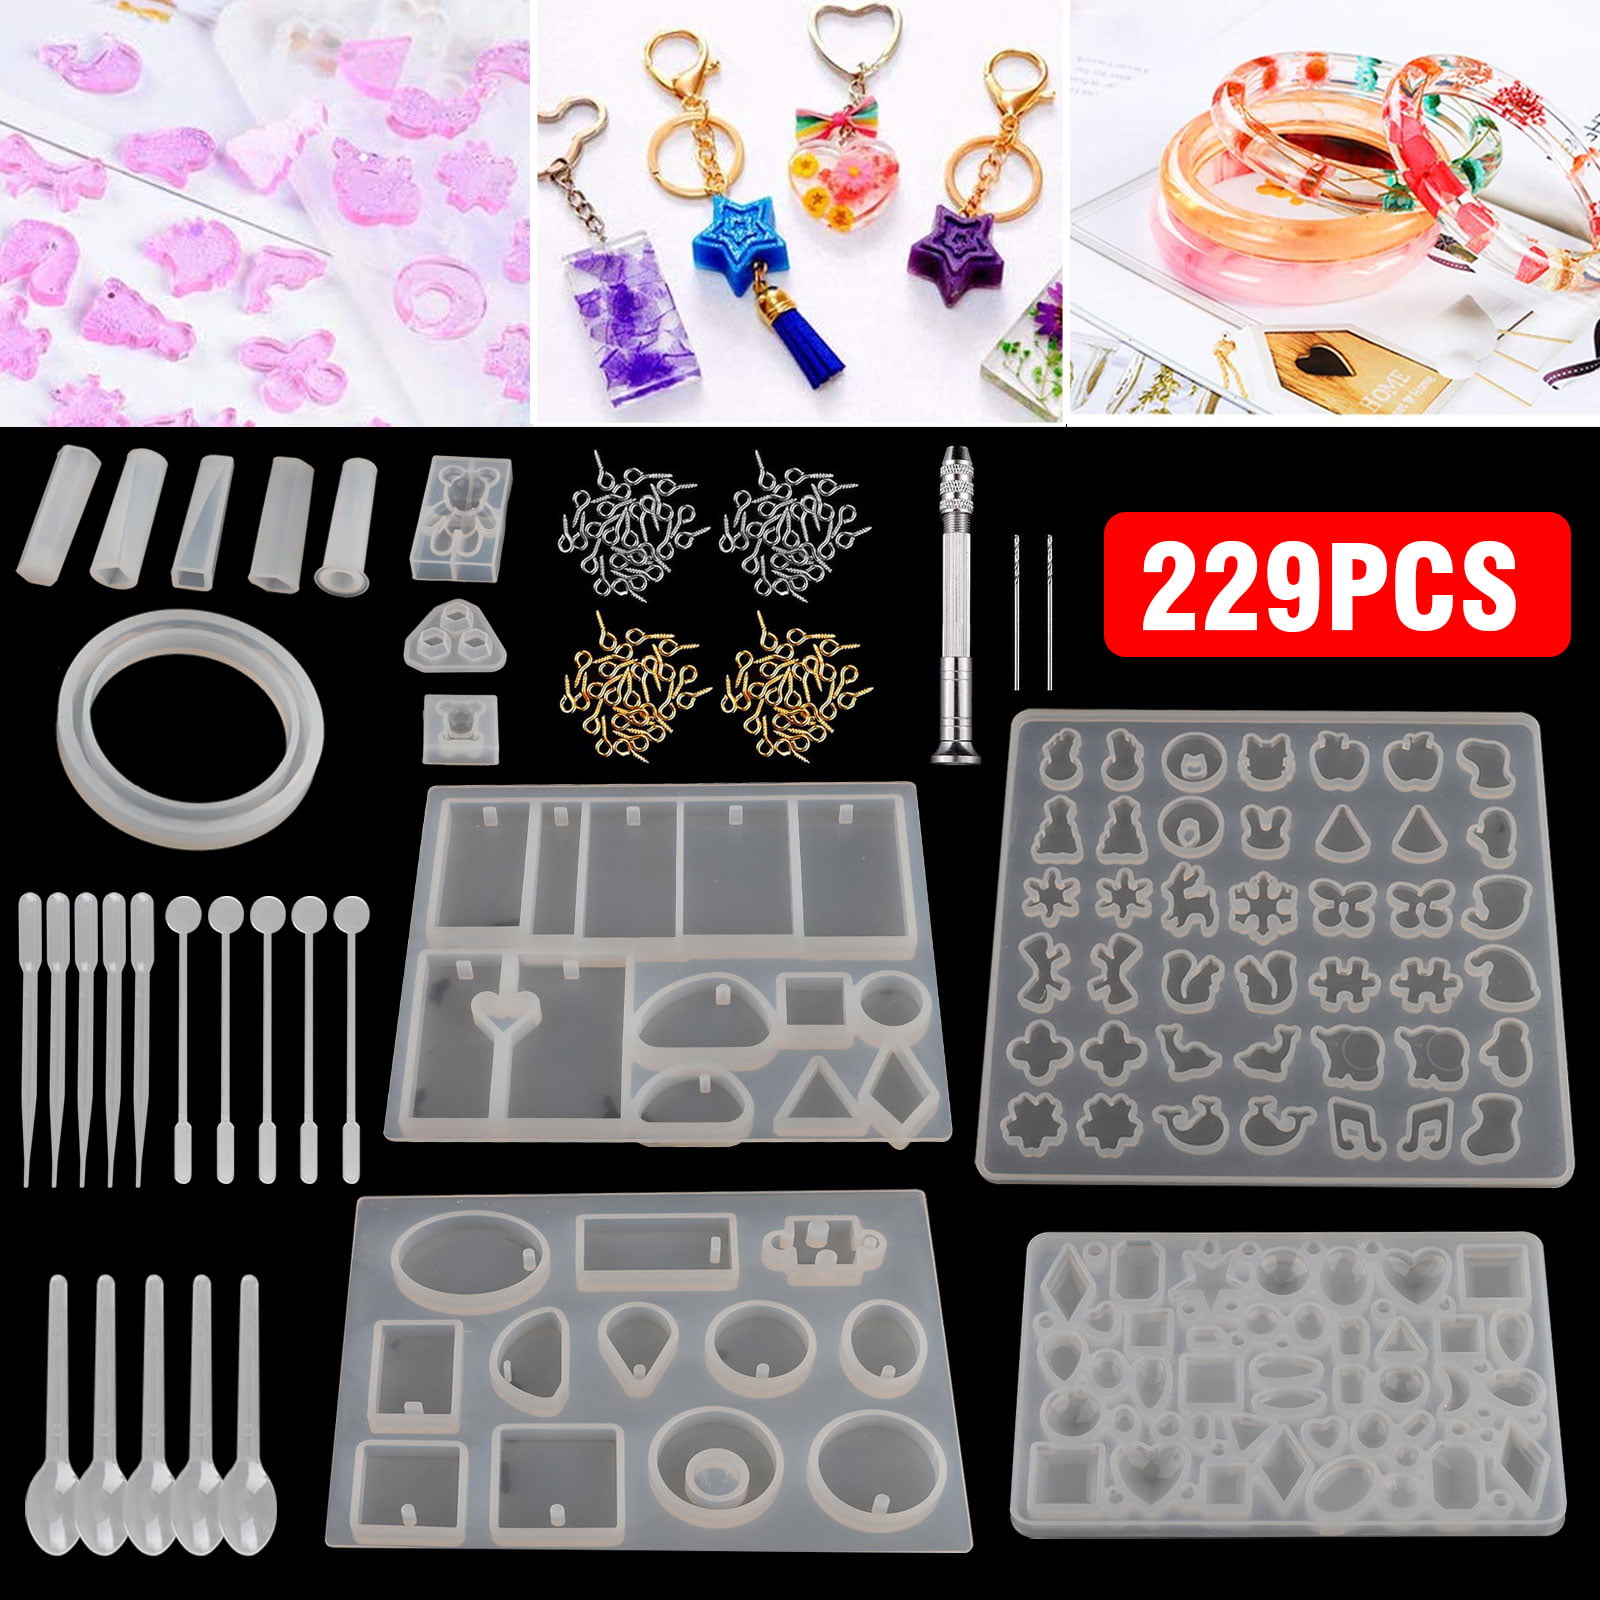 Resin Casting Mold Kit for Jewellery Making DIY Craft Silicone Moulds Epoxy Earring Resin Molds Gifts for Women Girls Pack of 8 Include Earring Hooks, Jump Rings,Eye Pins